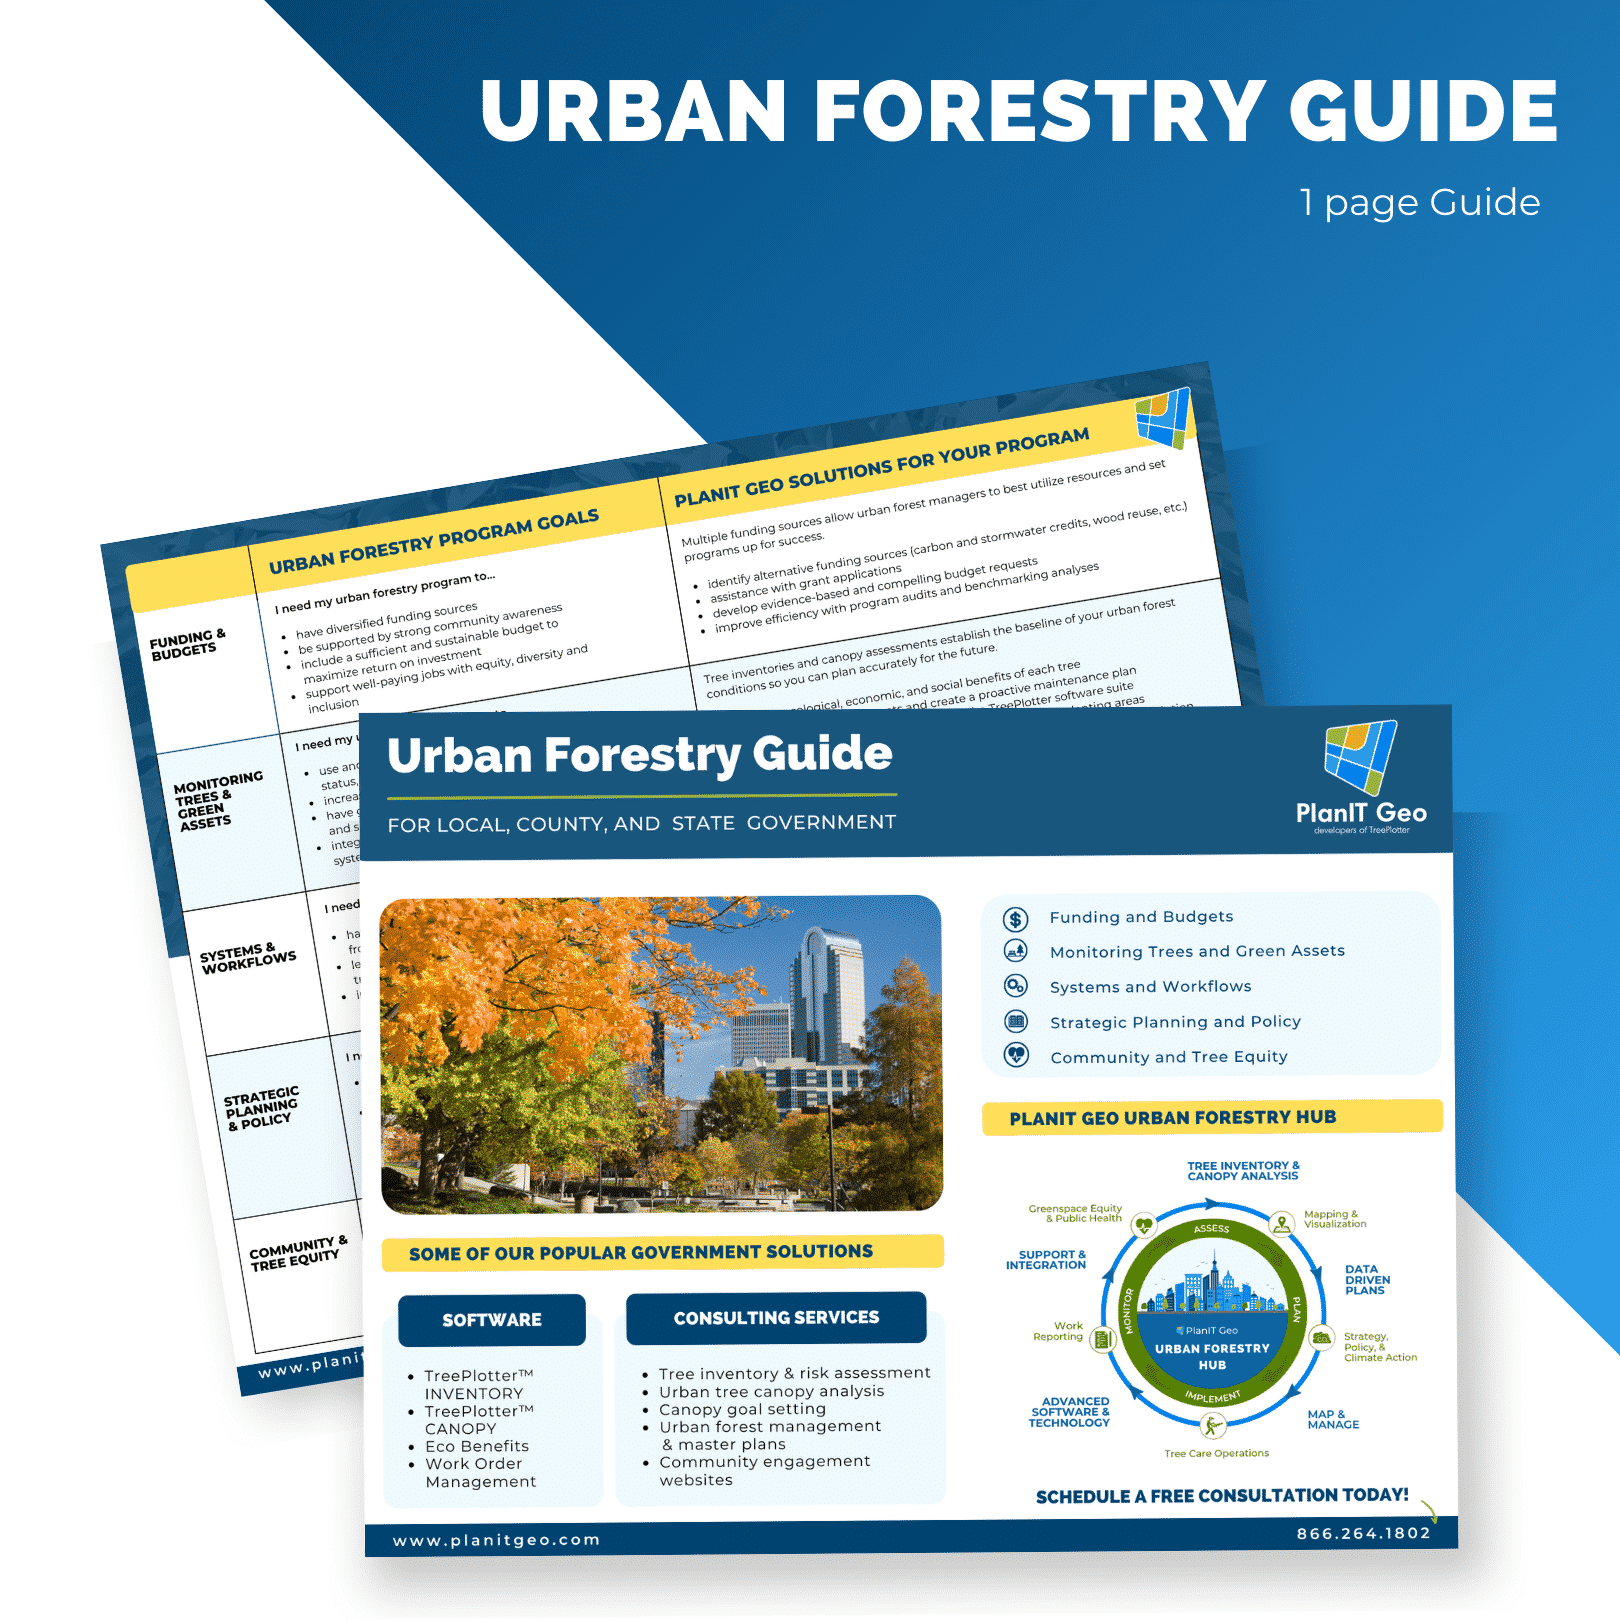 PlanIT Geo Urban Forestry Guide for Governments 1 page guide